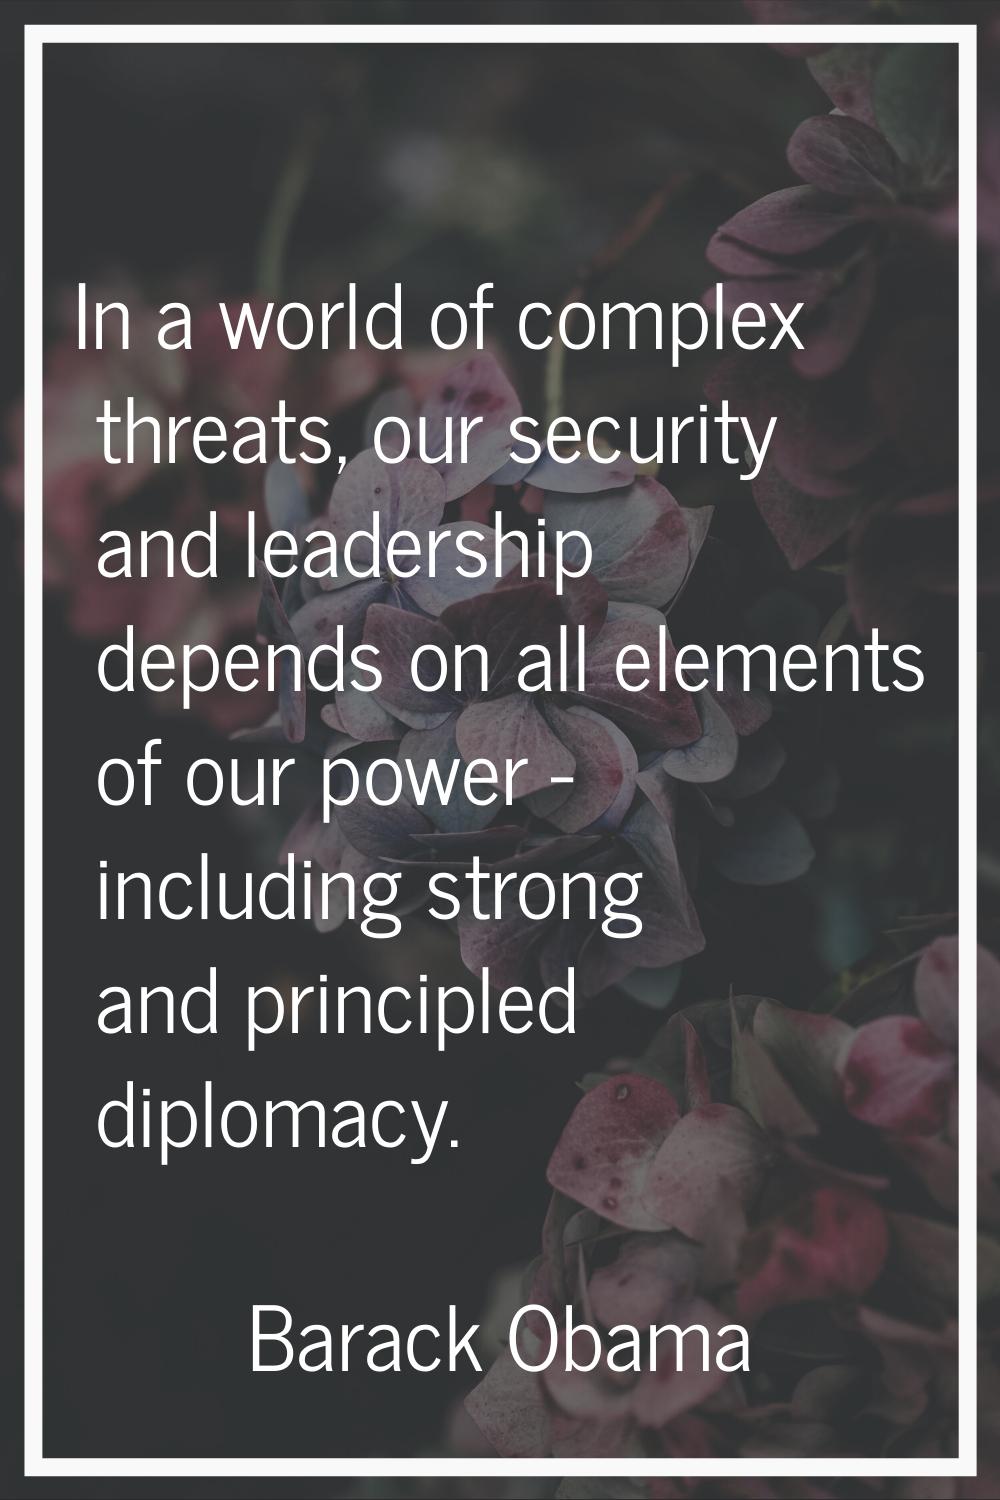 In a world of complex threats, our security and leadership depends on all elements of our power - i